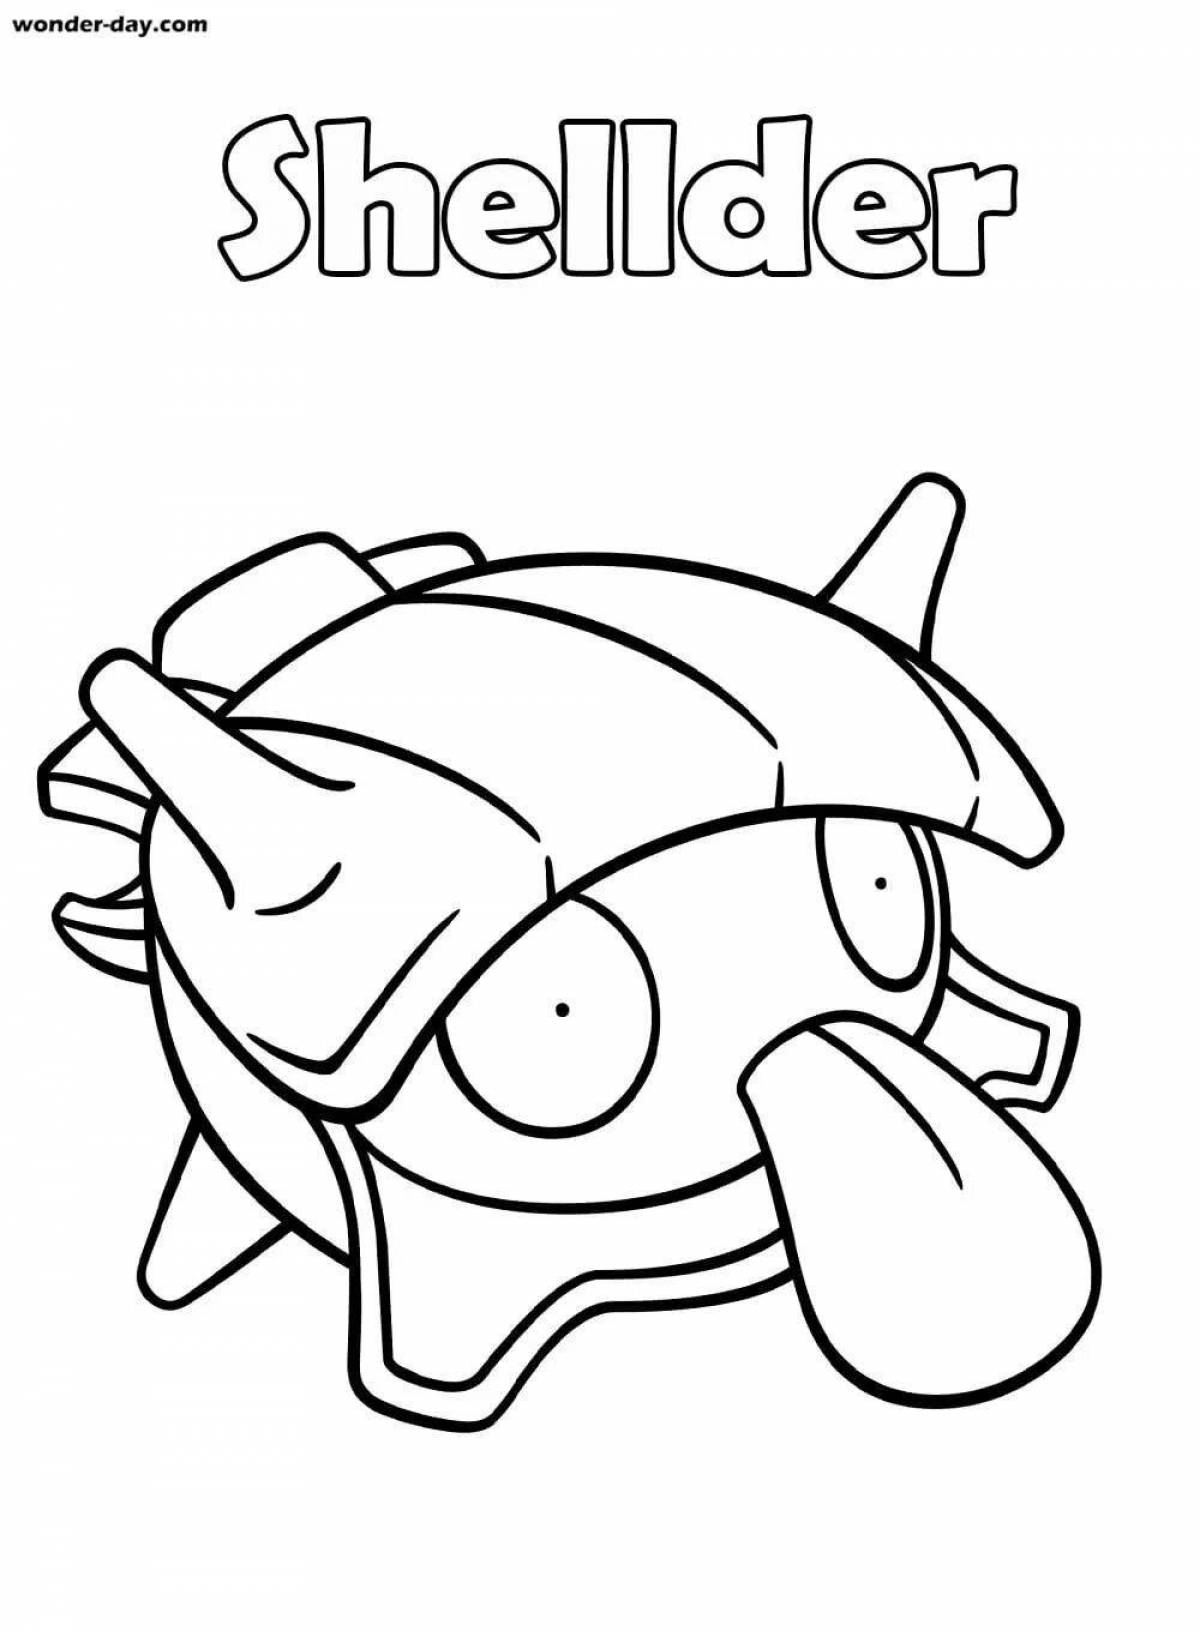 Radiant coloring page wonder day